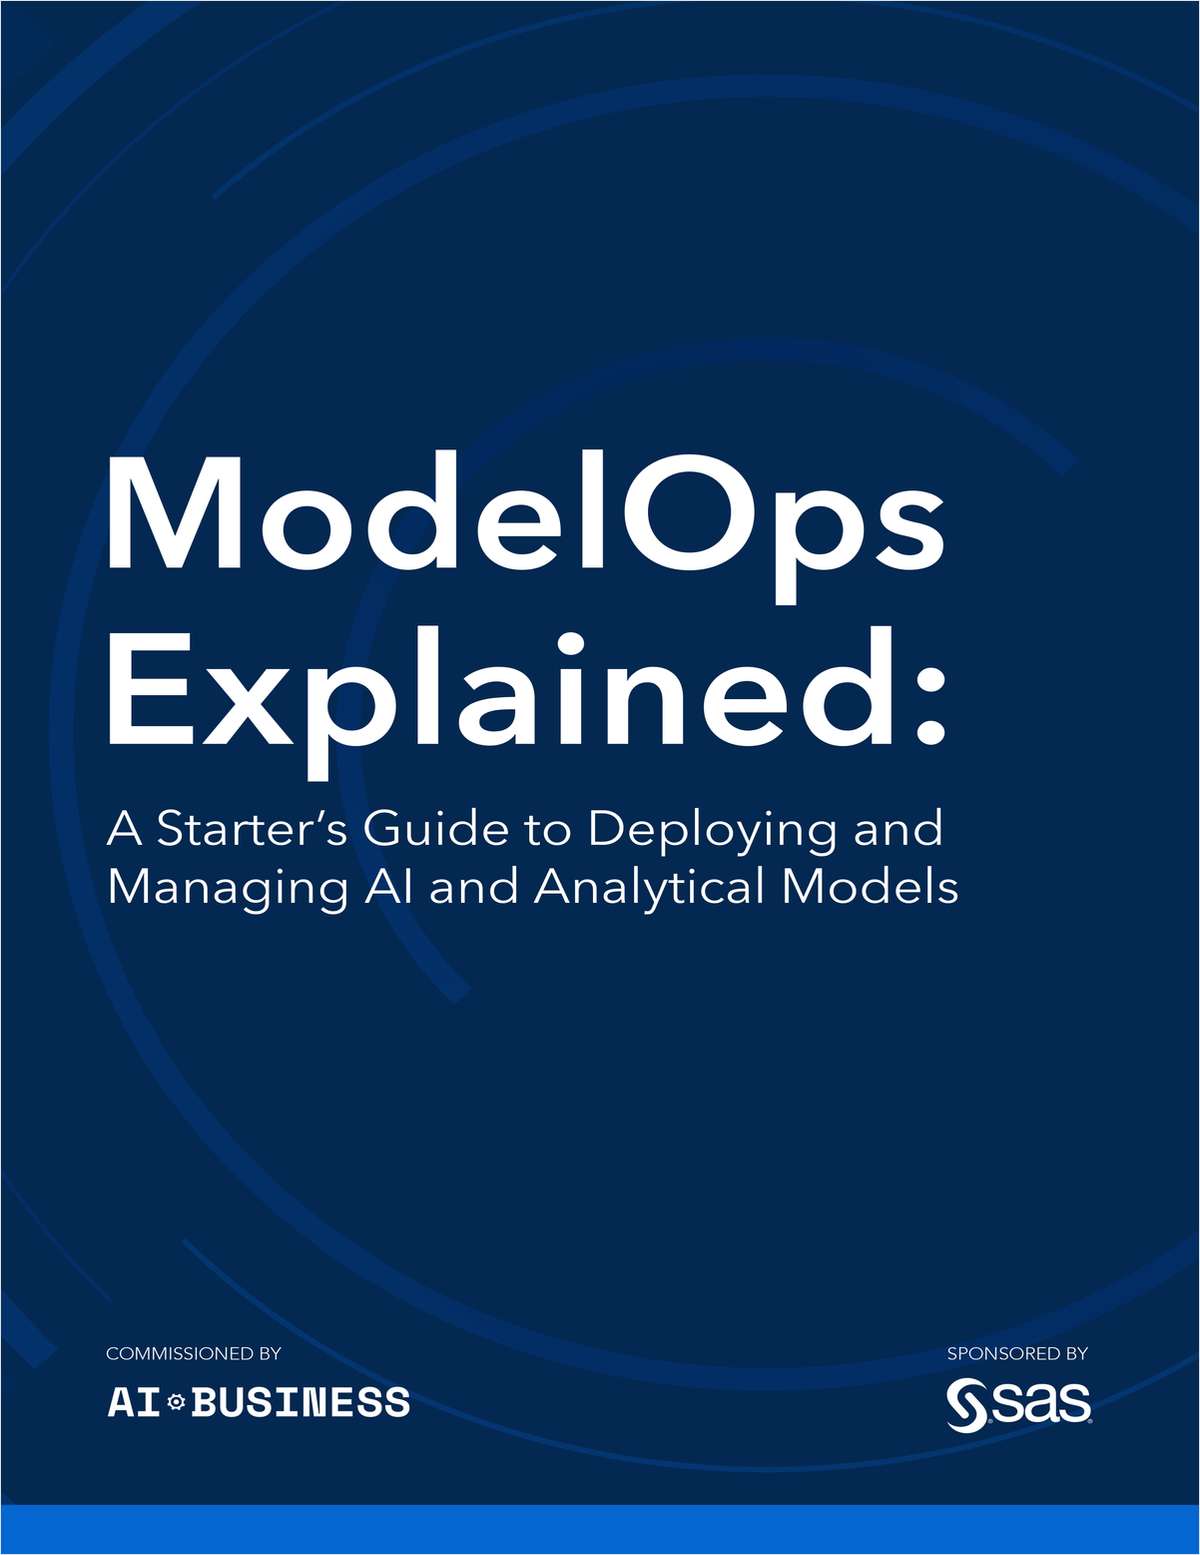 ModelOps Explained: A Starter's Guide to Deploying and Managing AI and Analytical Models